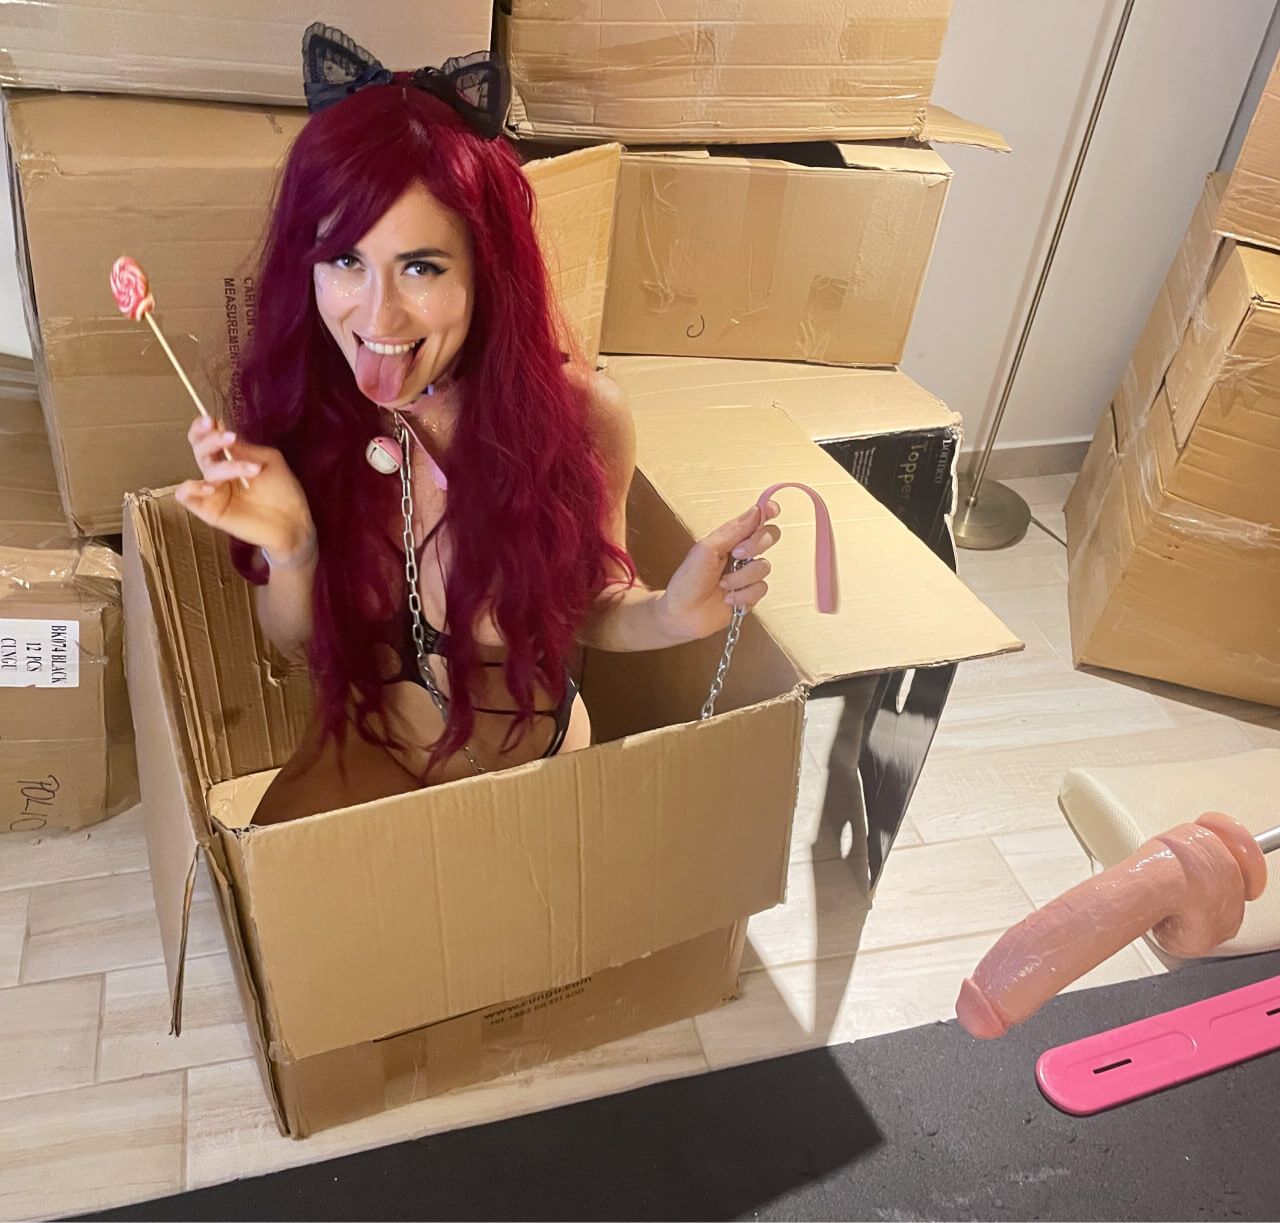 Fetish sex out of the box